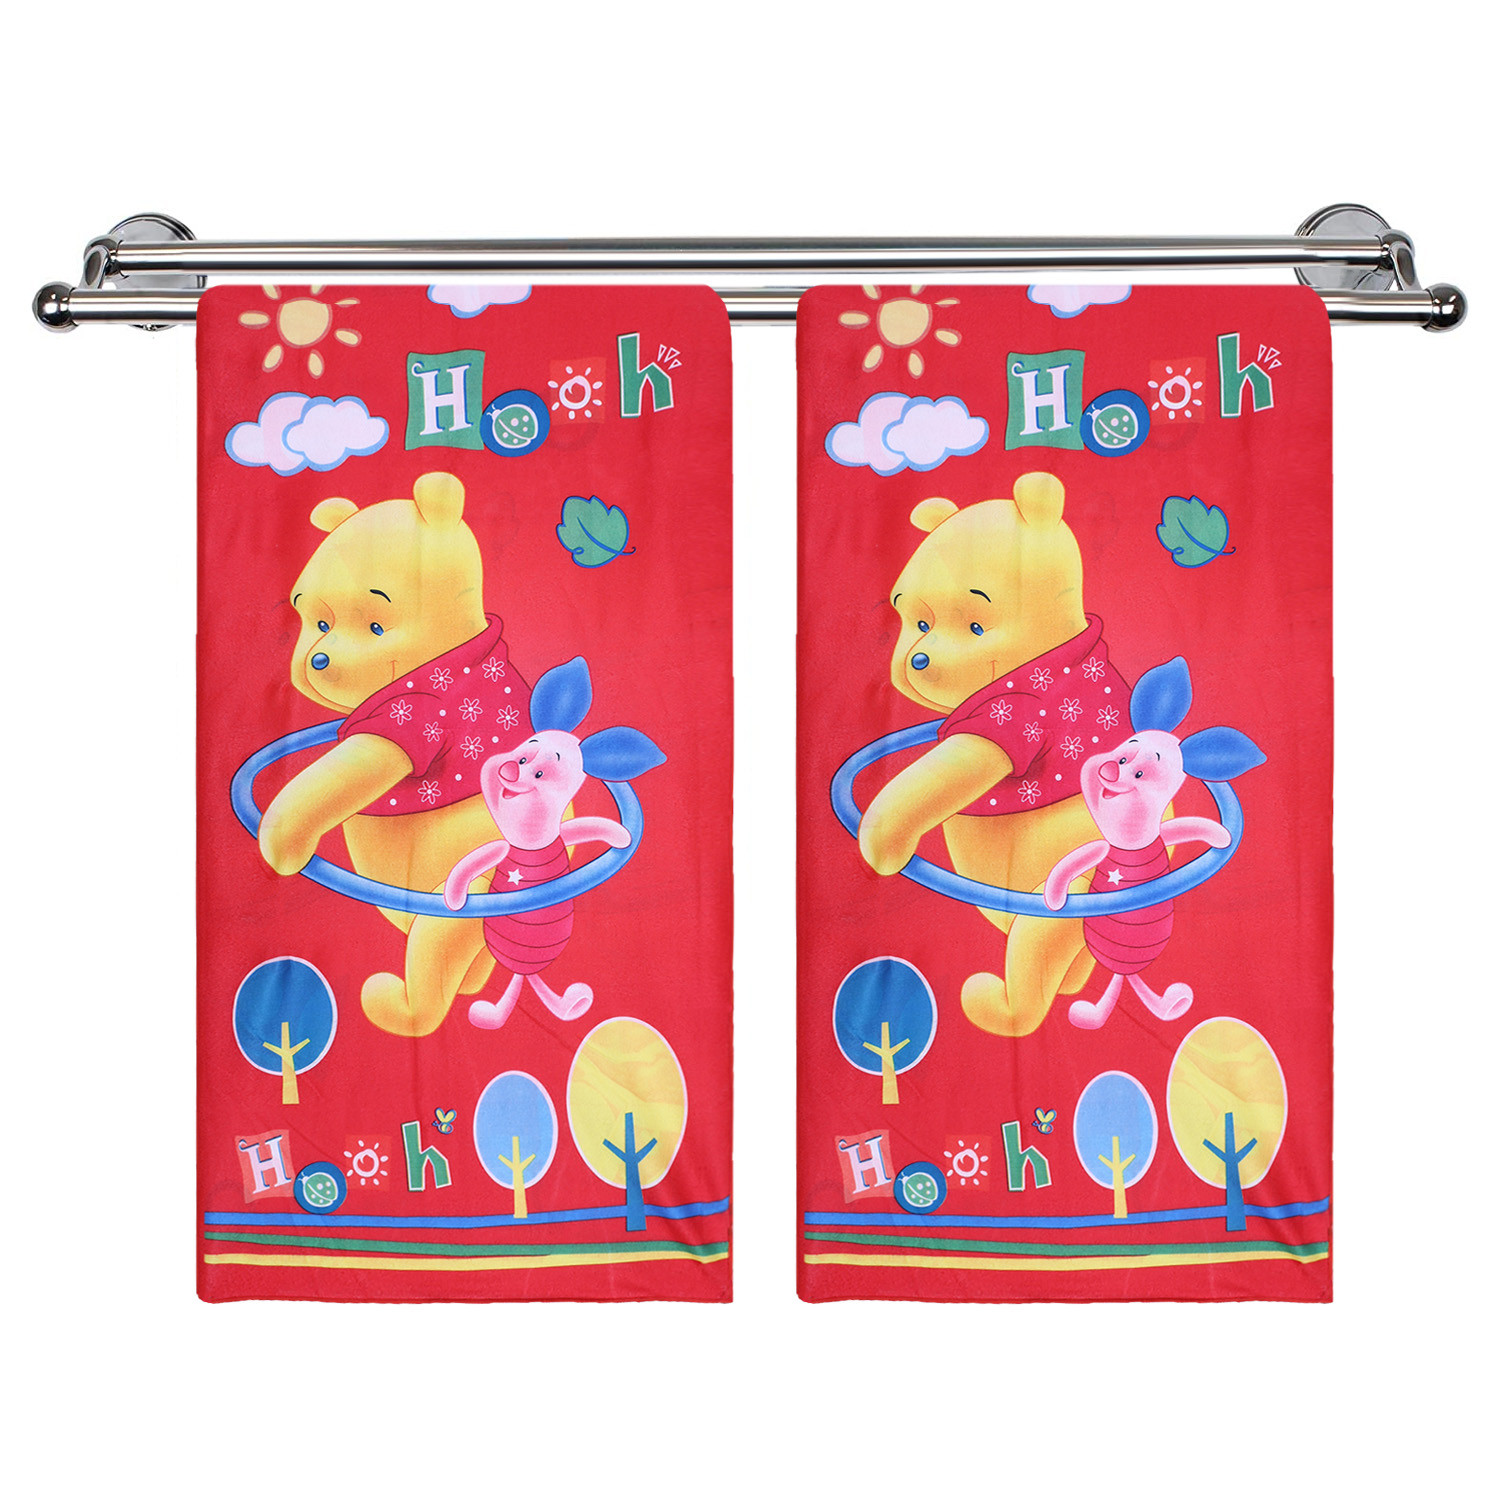 Kuber Industries Kids Bath Towel|Soft Cotton & Sides Stitched Baby Towel|Microfibered Winnie the Pooh and Piglet Pattern Toddler Towel,55x26 Inch (Red)